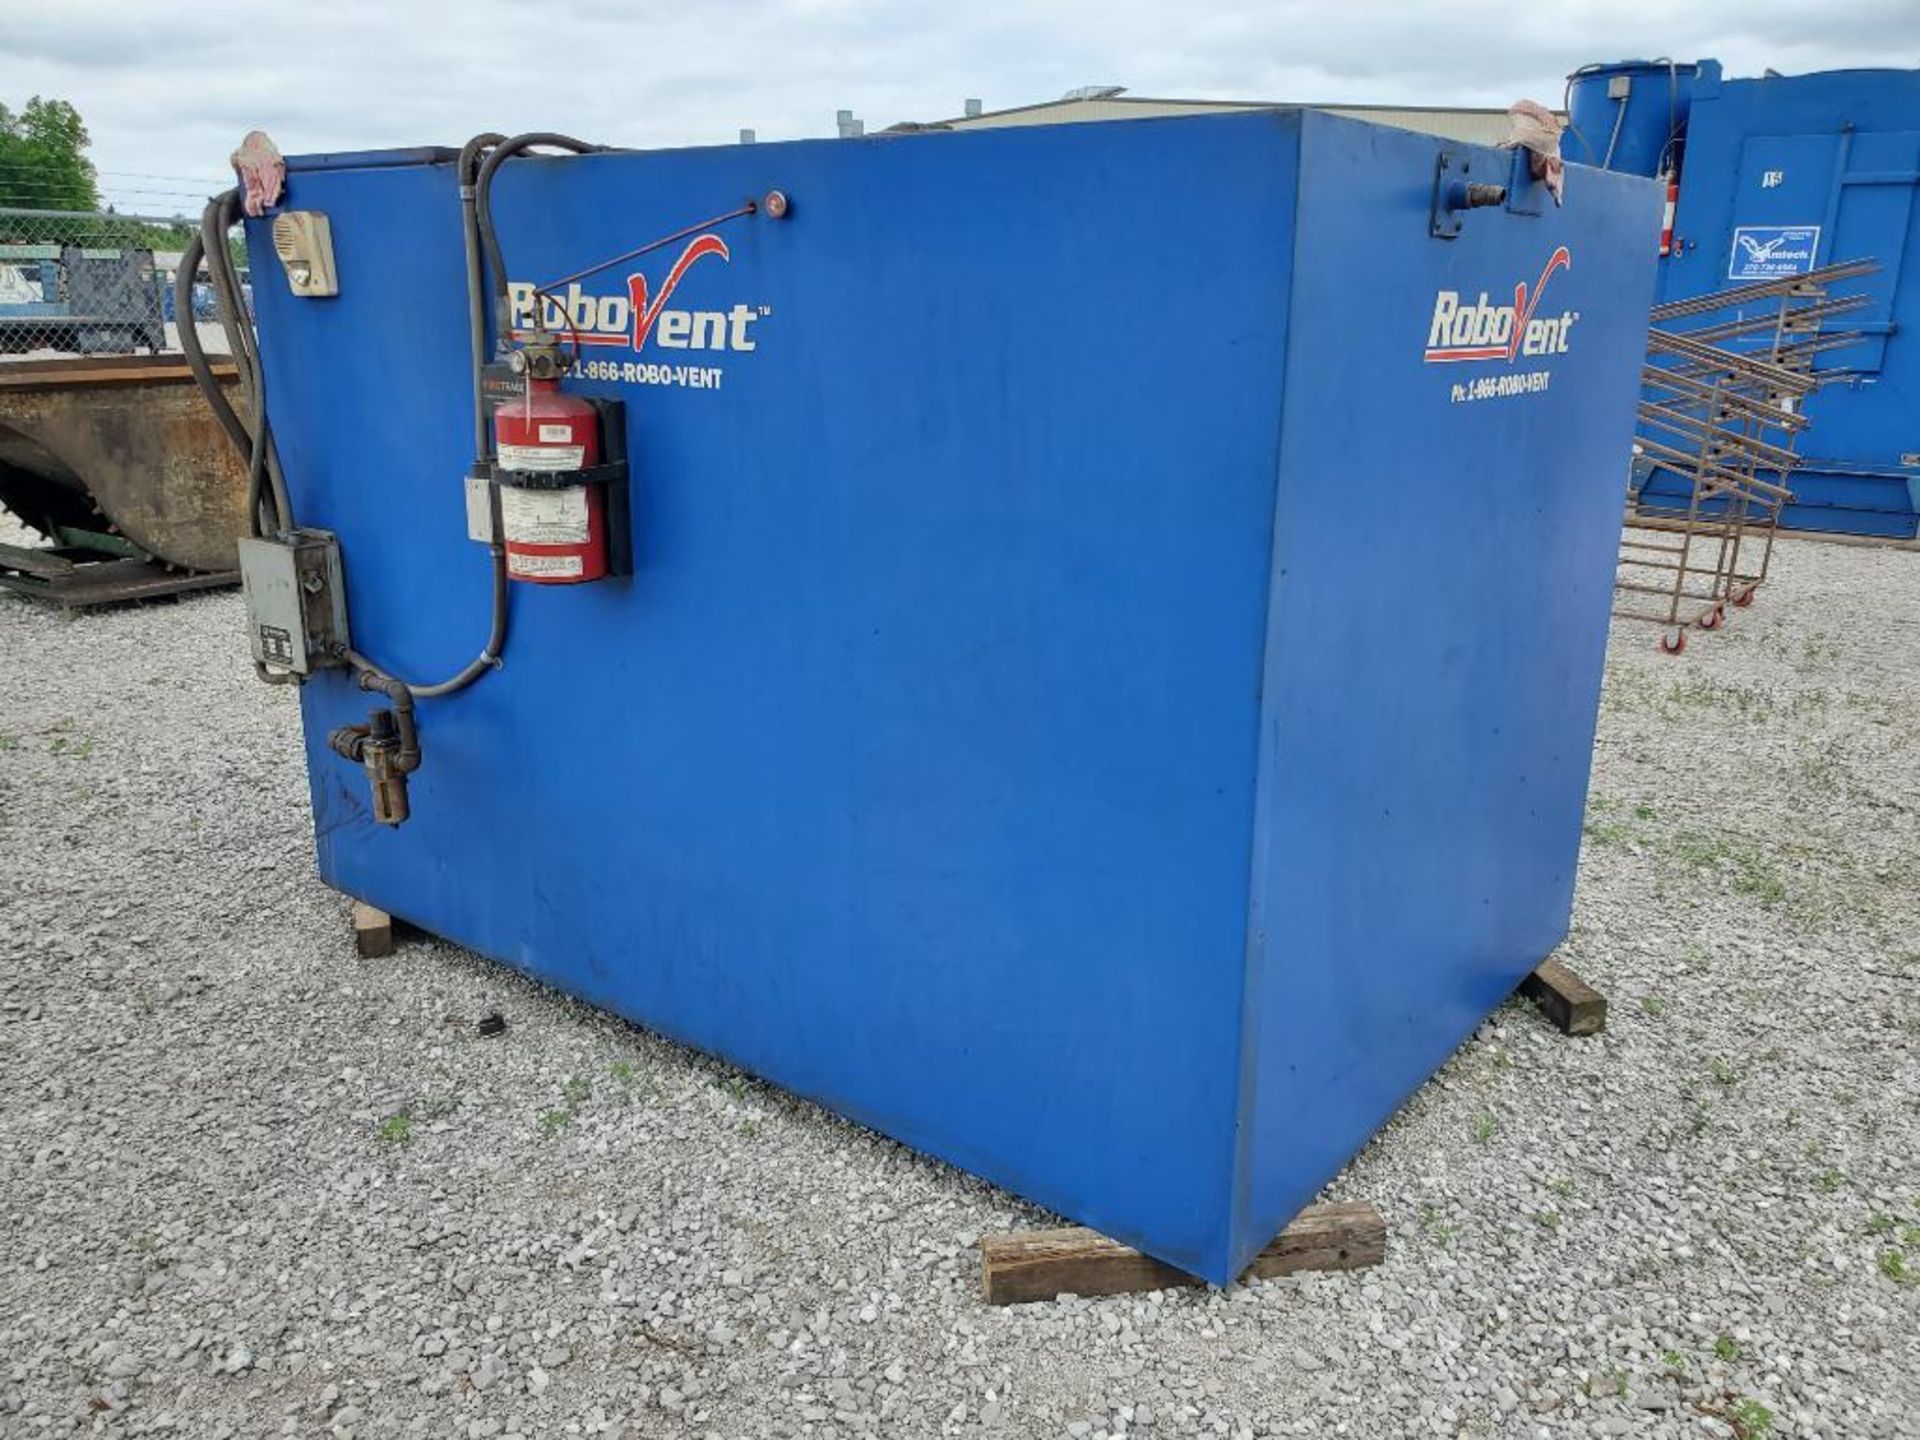 Great Lakes Air Robovent Dust Collector, Model DFS-8000-8, S/N 19760, 15 HP, 3 PH, 21 AMP, 460V - Image 6 of 7